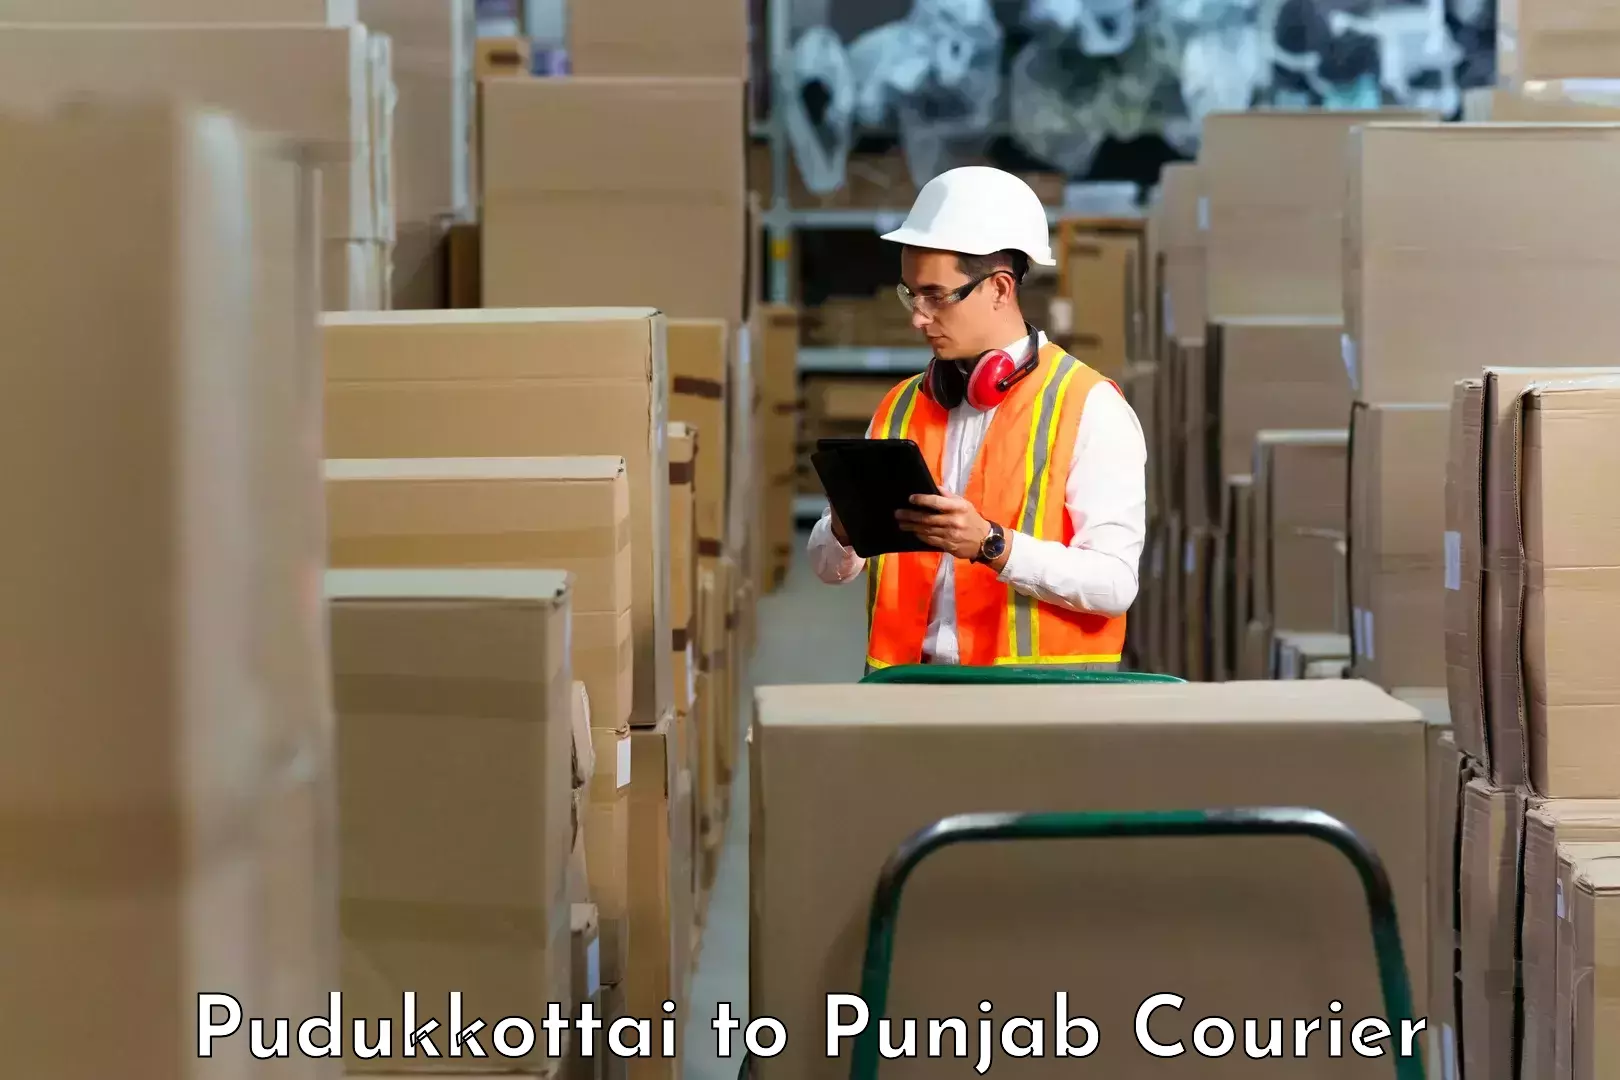 Personalized courier experiences in Pudukkottai to Patiala